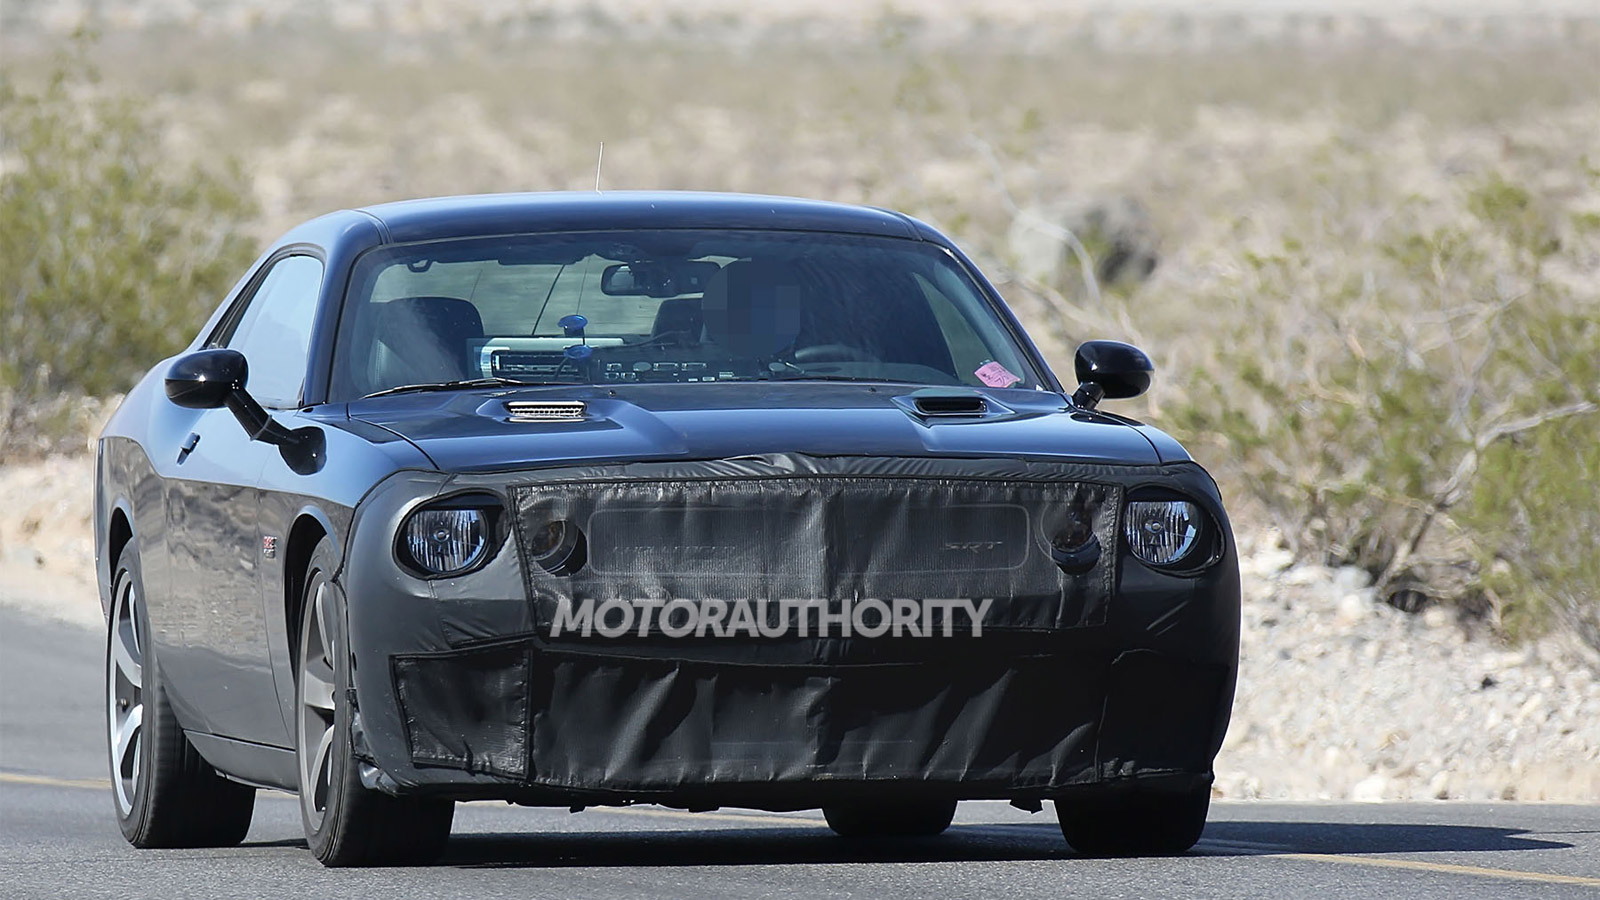 Spy shots of a 2015 Dodge Challenger SRT powered by the ‘Hellcat’ supercharged HEMI V-8